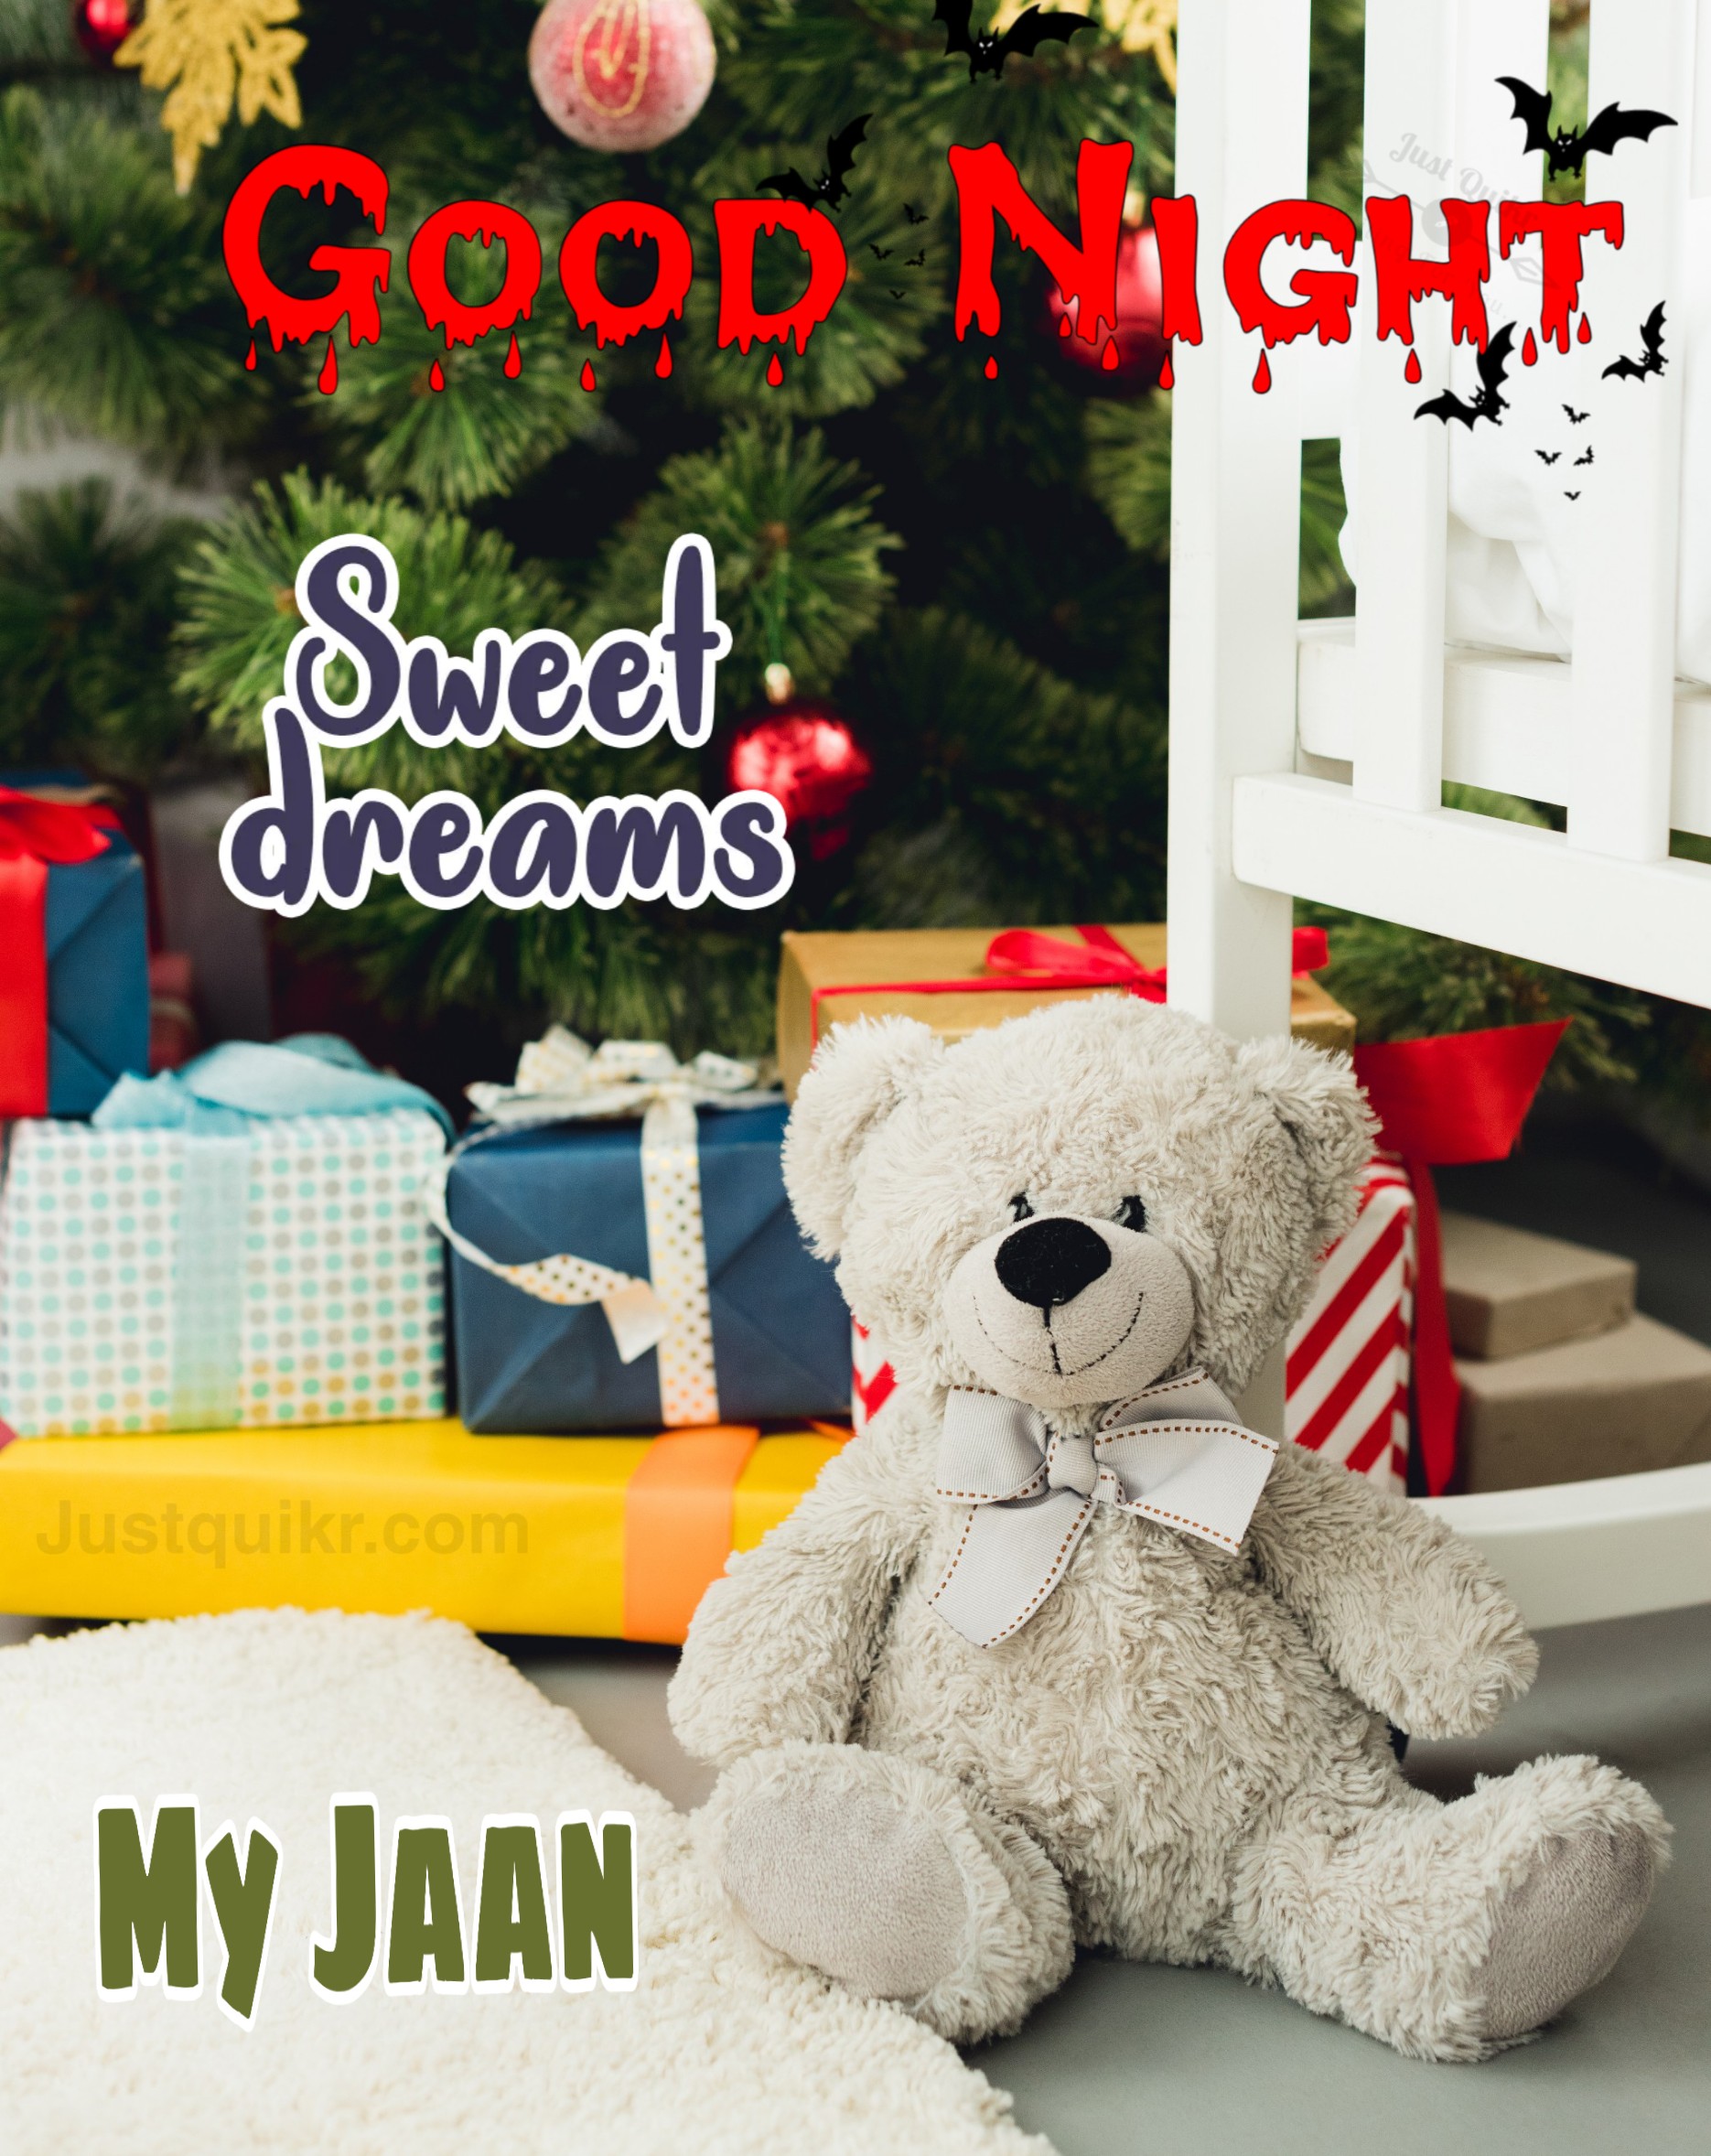 Good Night HD Pics Images For Jaan 